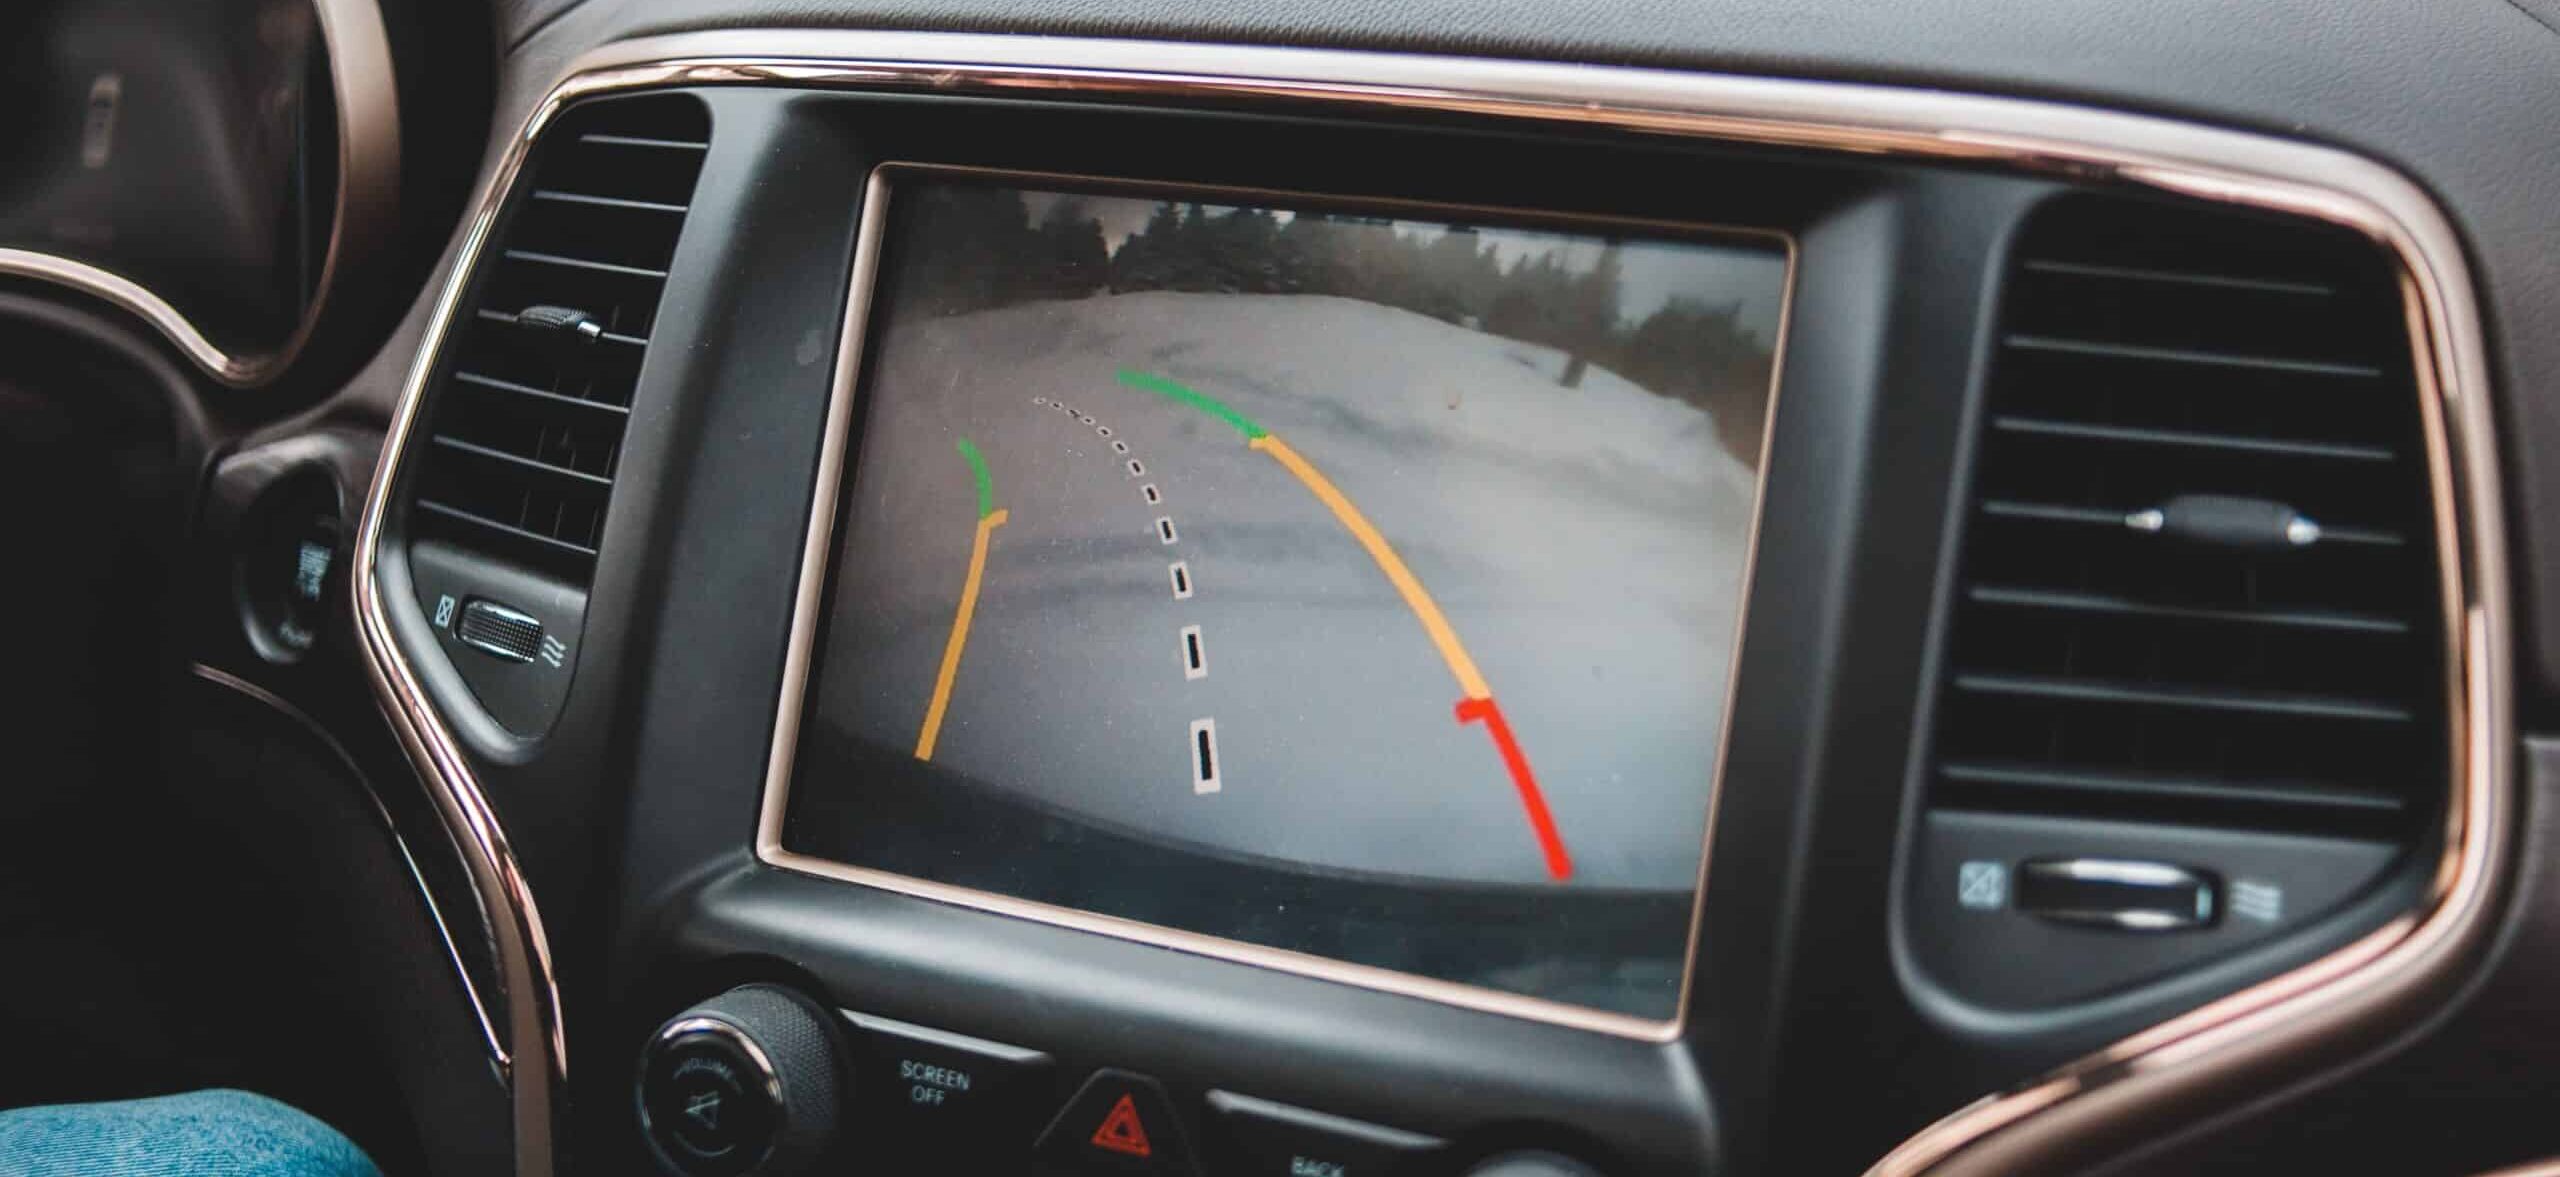 Back up camera for truck